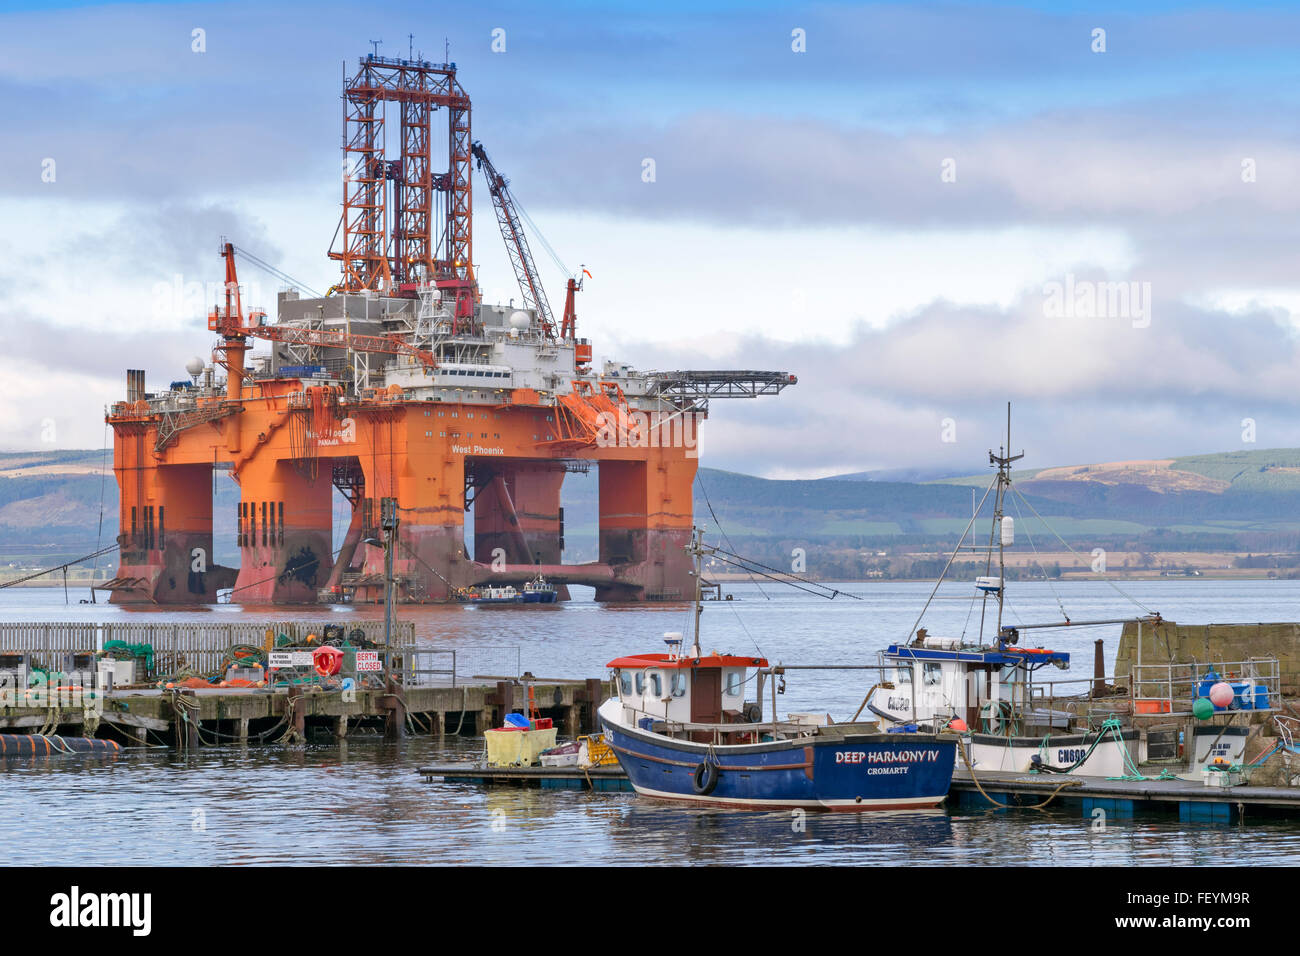 NORTH SEA OIL RIG WEST PHOENIX TOWERS OVER BOATS MOORED IN CROMARTY HARBOUR CROMARTY FIRTH SCOTLAND Stock Photo